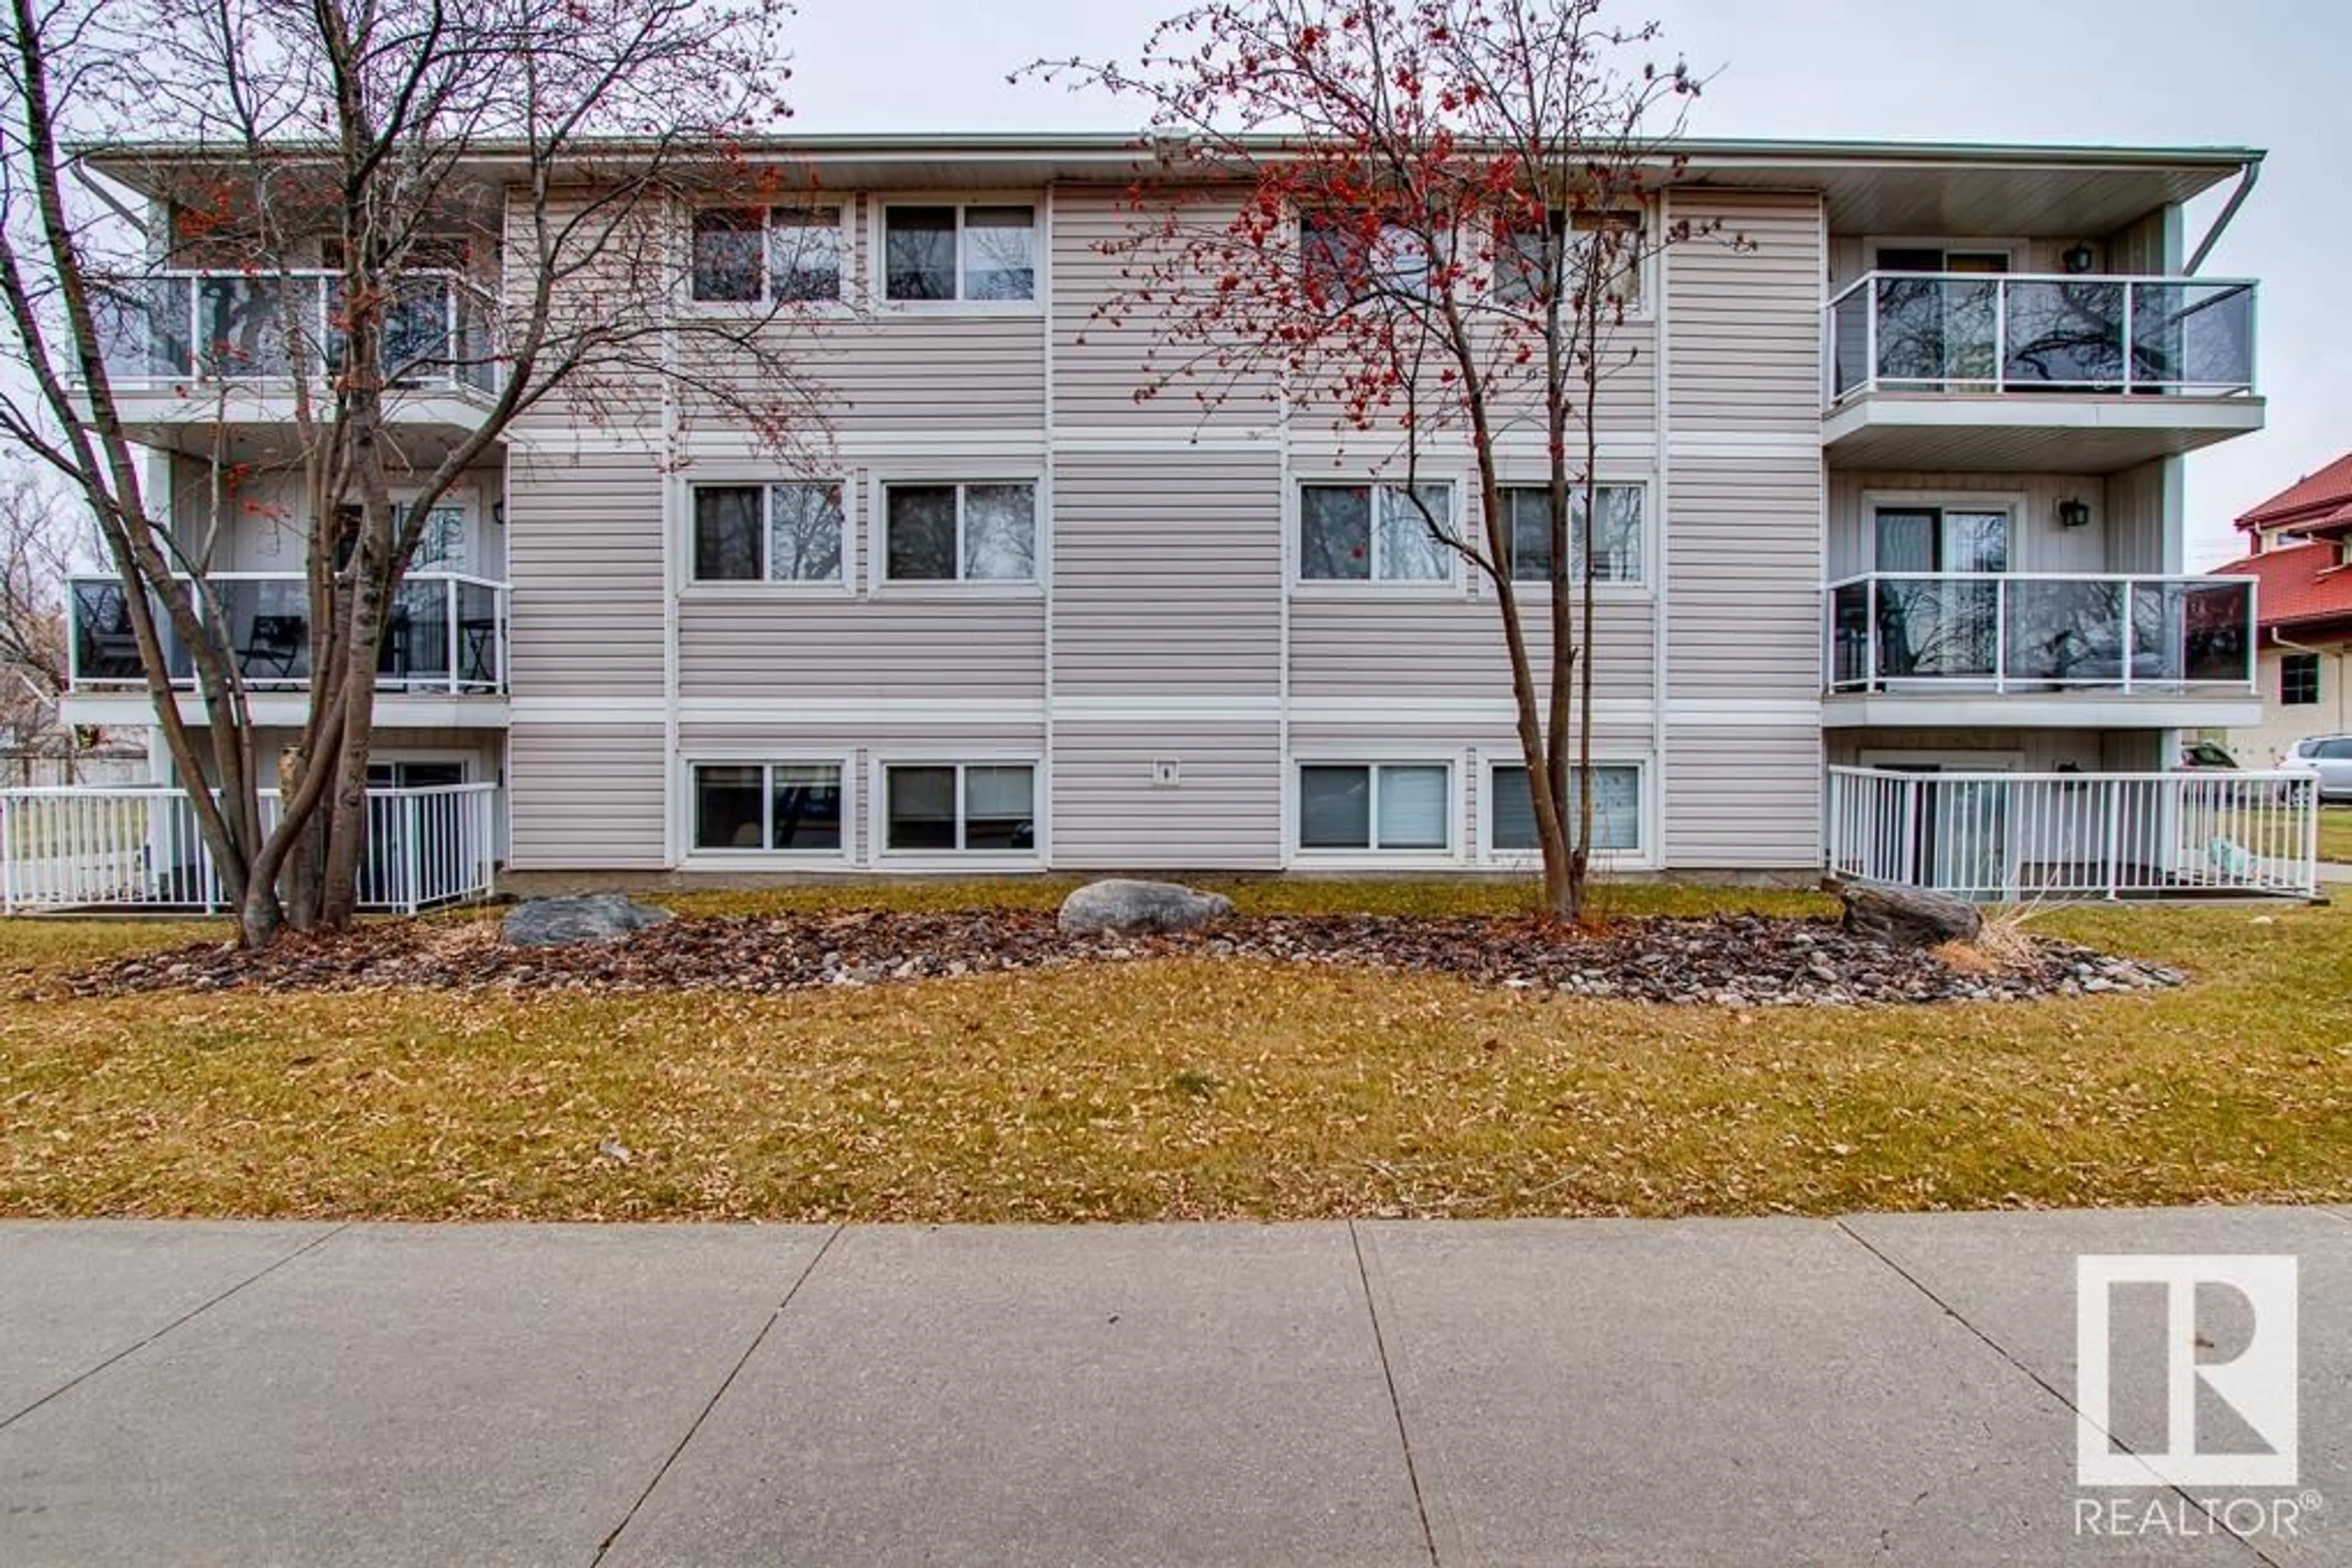 A pic from exterior of the house or condo for #104 11324 97 ST NW, Edmonton Alberta T5G1X4